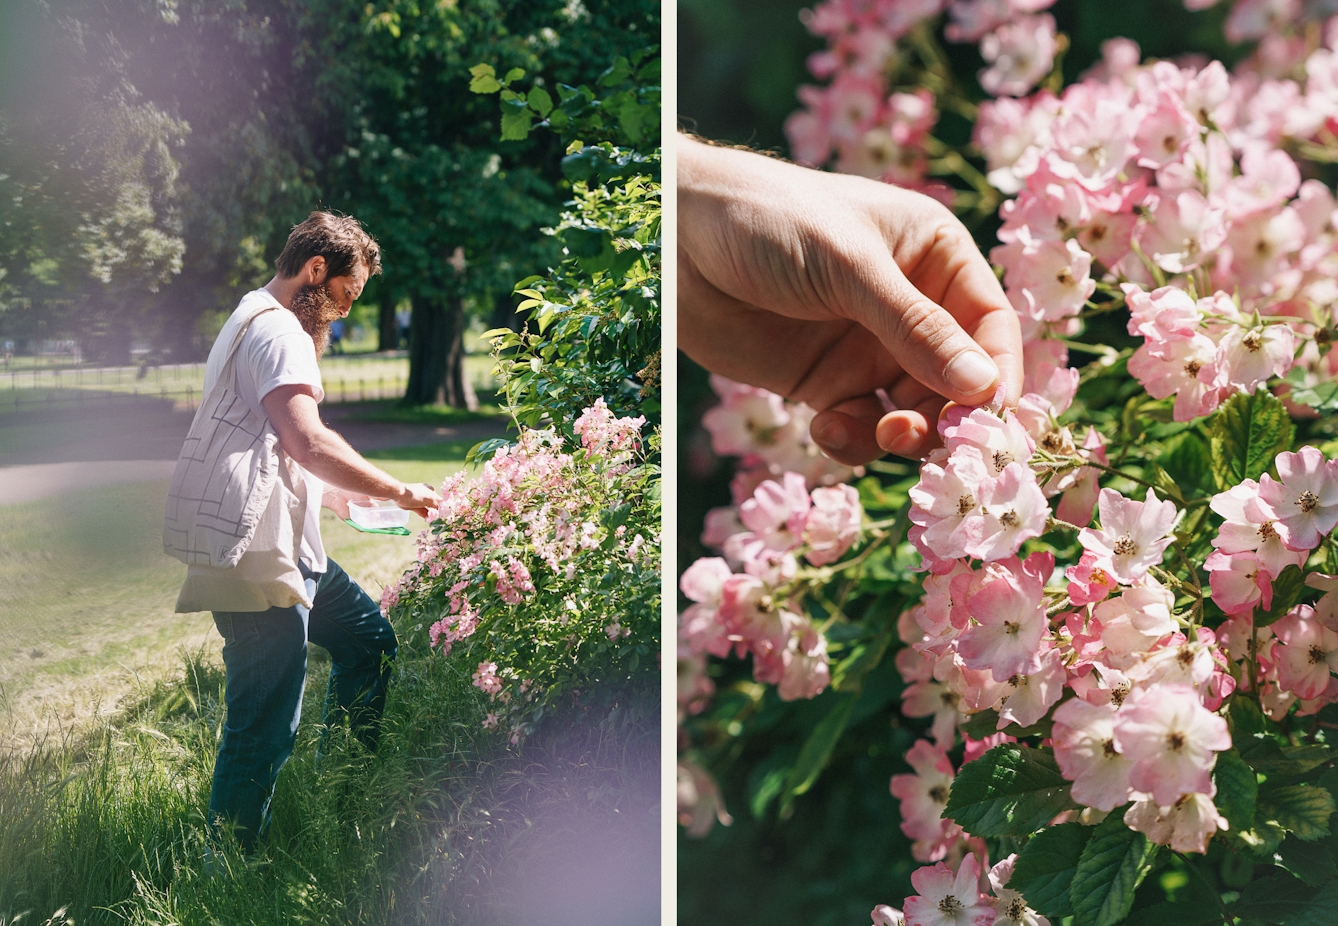 Photographic diptych. The image on the left shows a bearded man wearing jeans and a white t-shirt in an urban park picking pink rose petals from a rose bush. In his had he holds a Tupperware collecting box and he has several tote bags over his shoulder. The sun is bright and he is framed by a couple of out-of-focus flowers. The image on the right shows a close-up of a man's hand gently holding the petal of a pink rose head. The frame is full of other pink rose heads and green stalks.